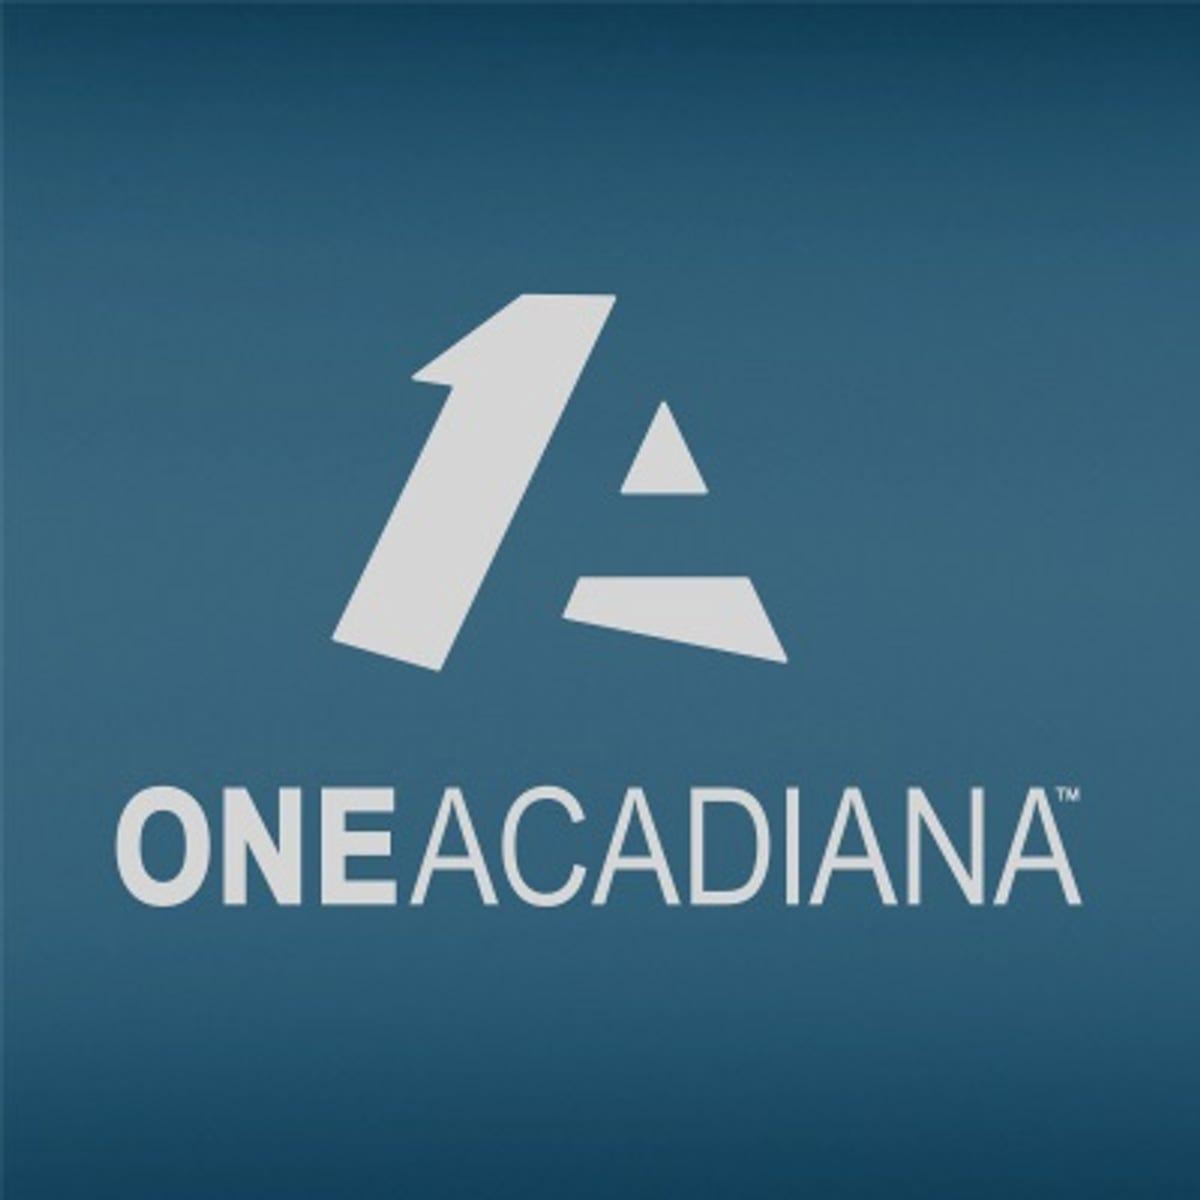 Acadiana Logo - One Acadiana, the Lafayette-area chamber of commerce, announces new CEO